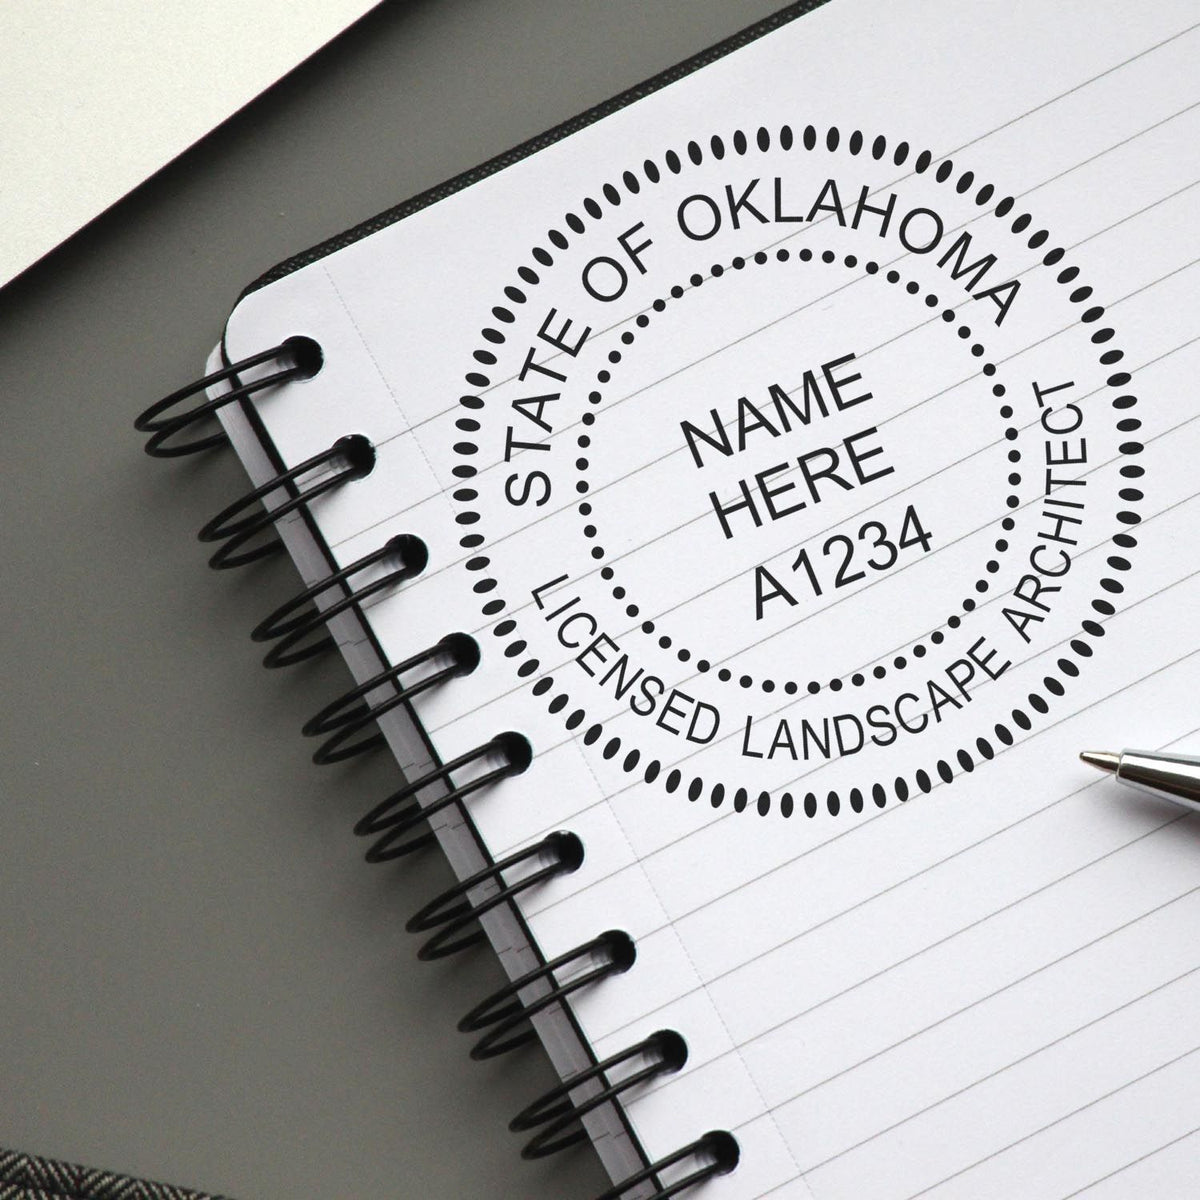 A stamped impression of the Self-Inking Oklahoma Landscape Architect Stamp in this stylish lifestyle photo, setting the tone for a unique and personalized product.